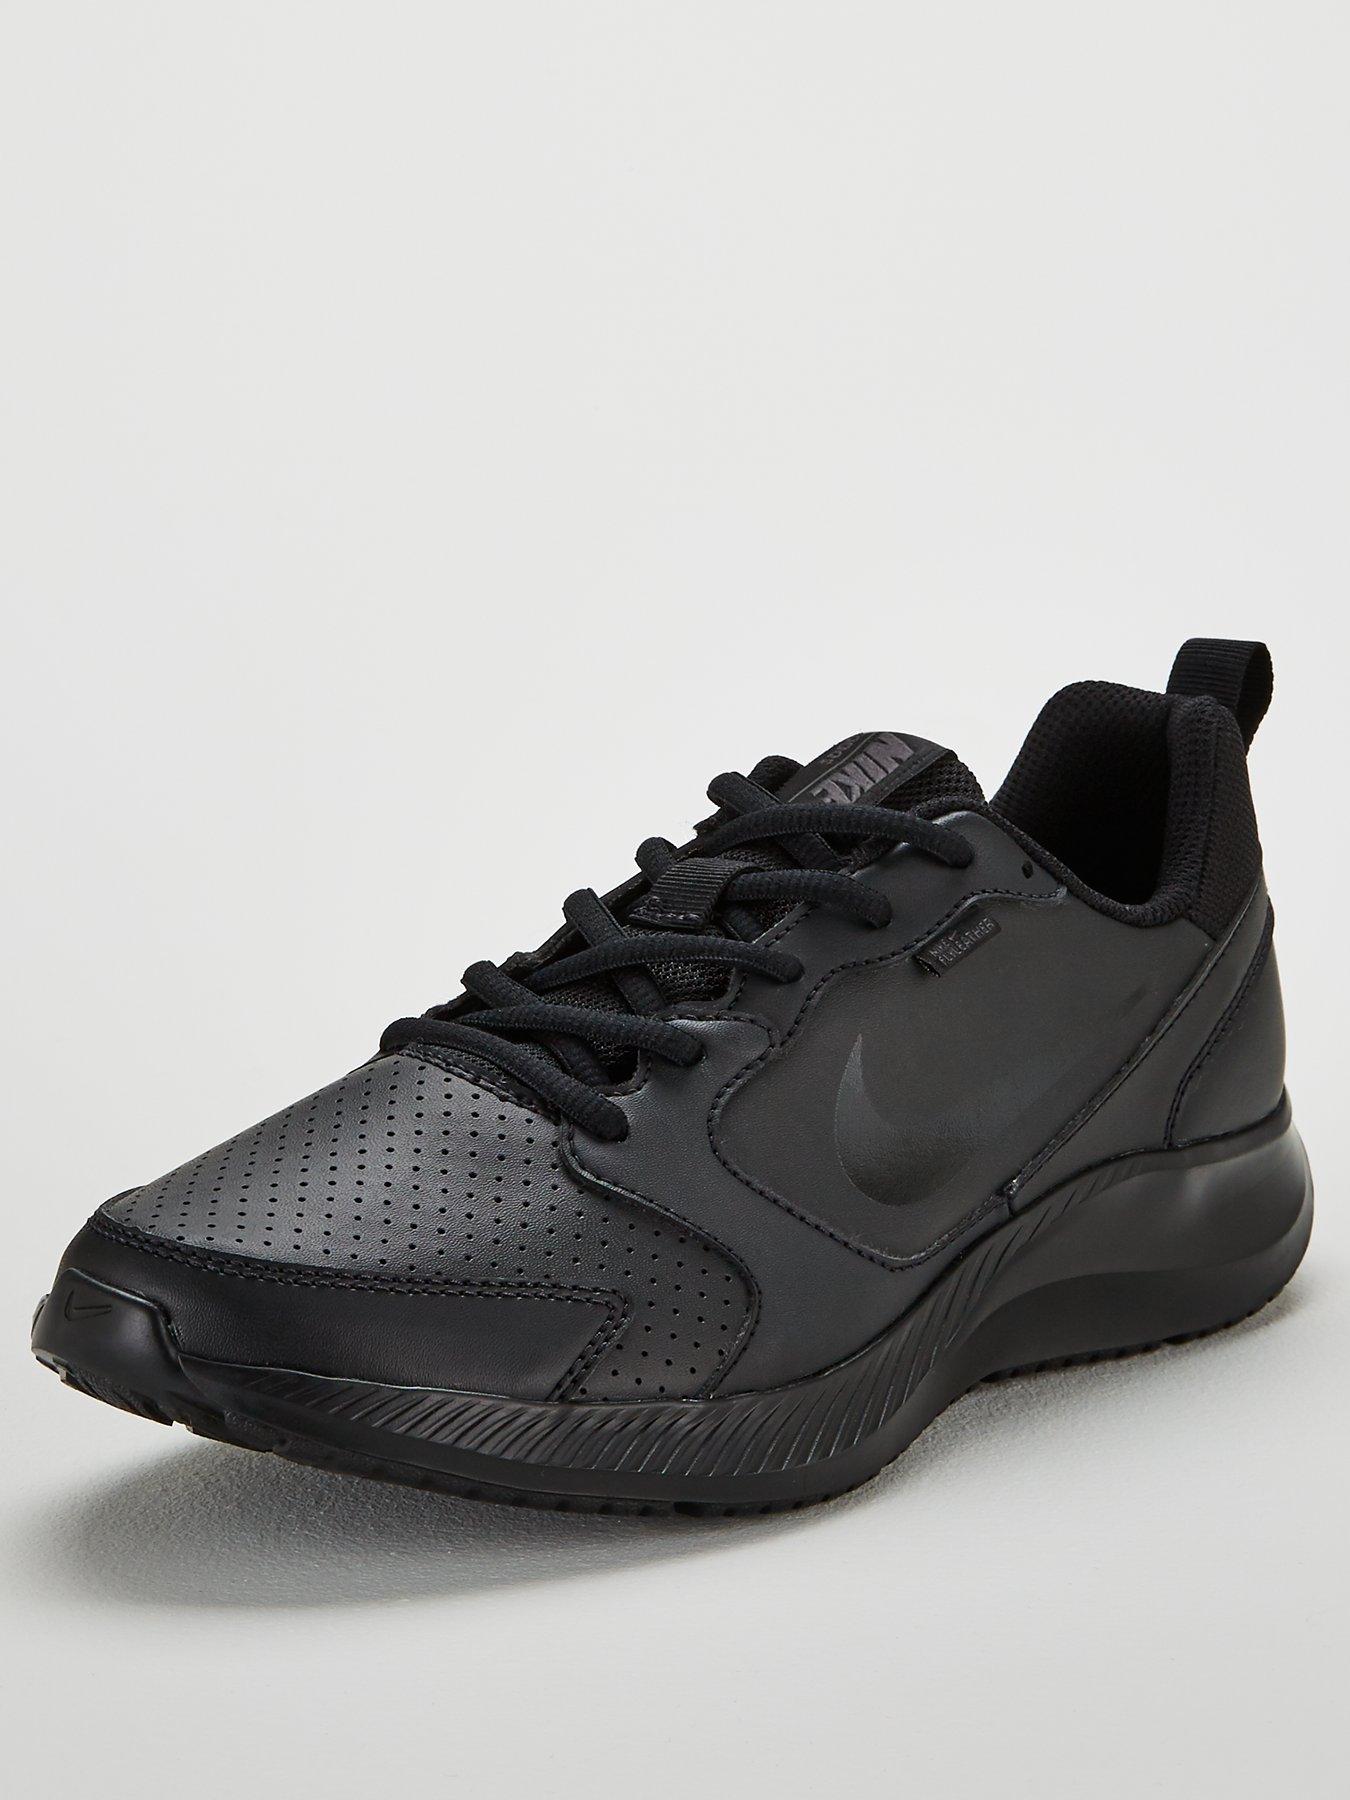 nike black trainers leather